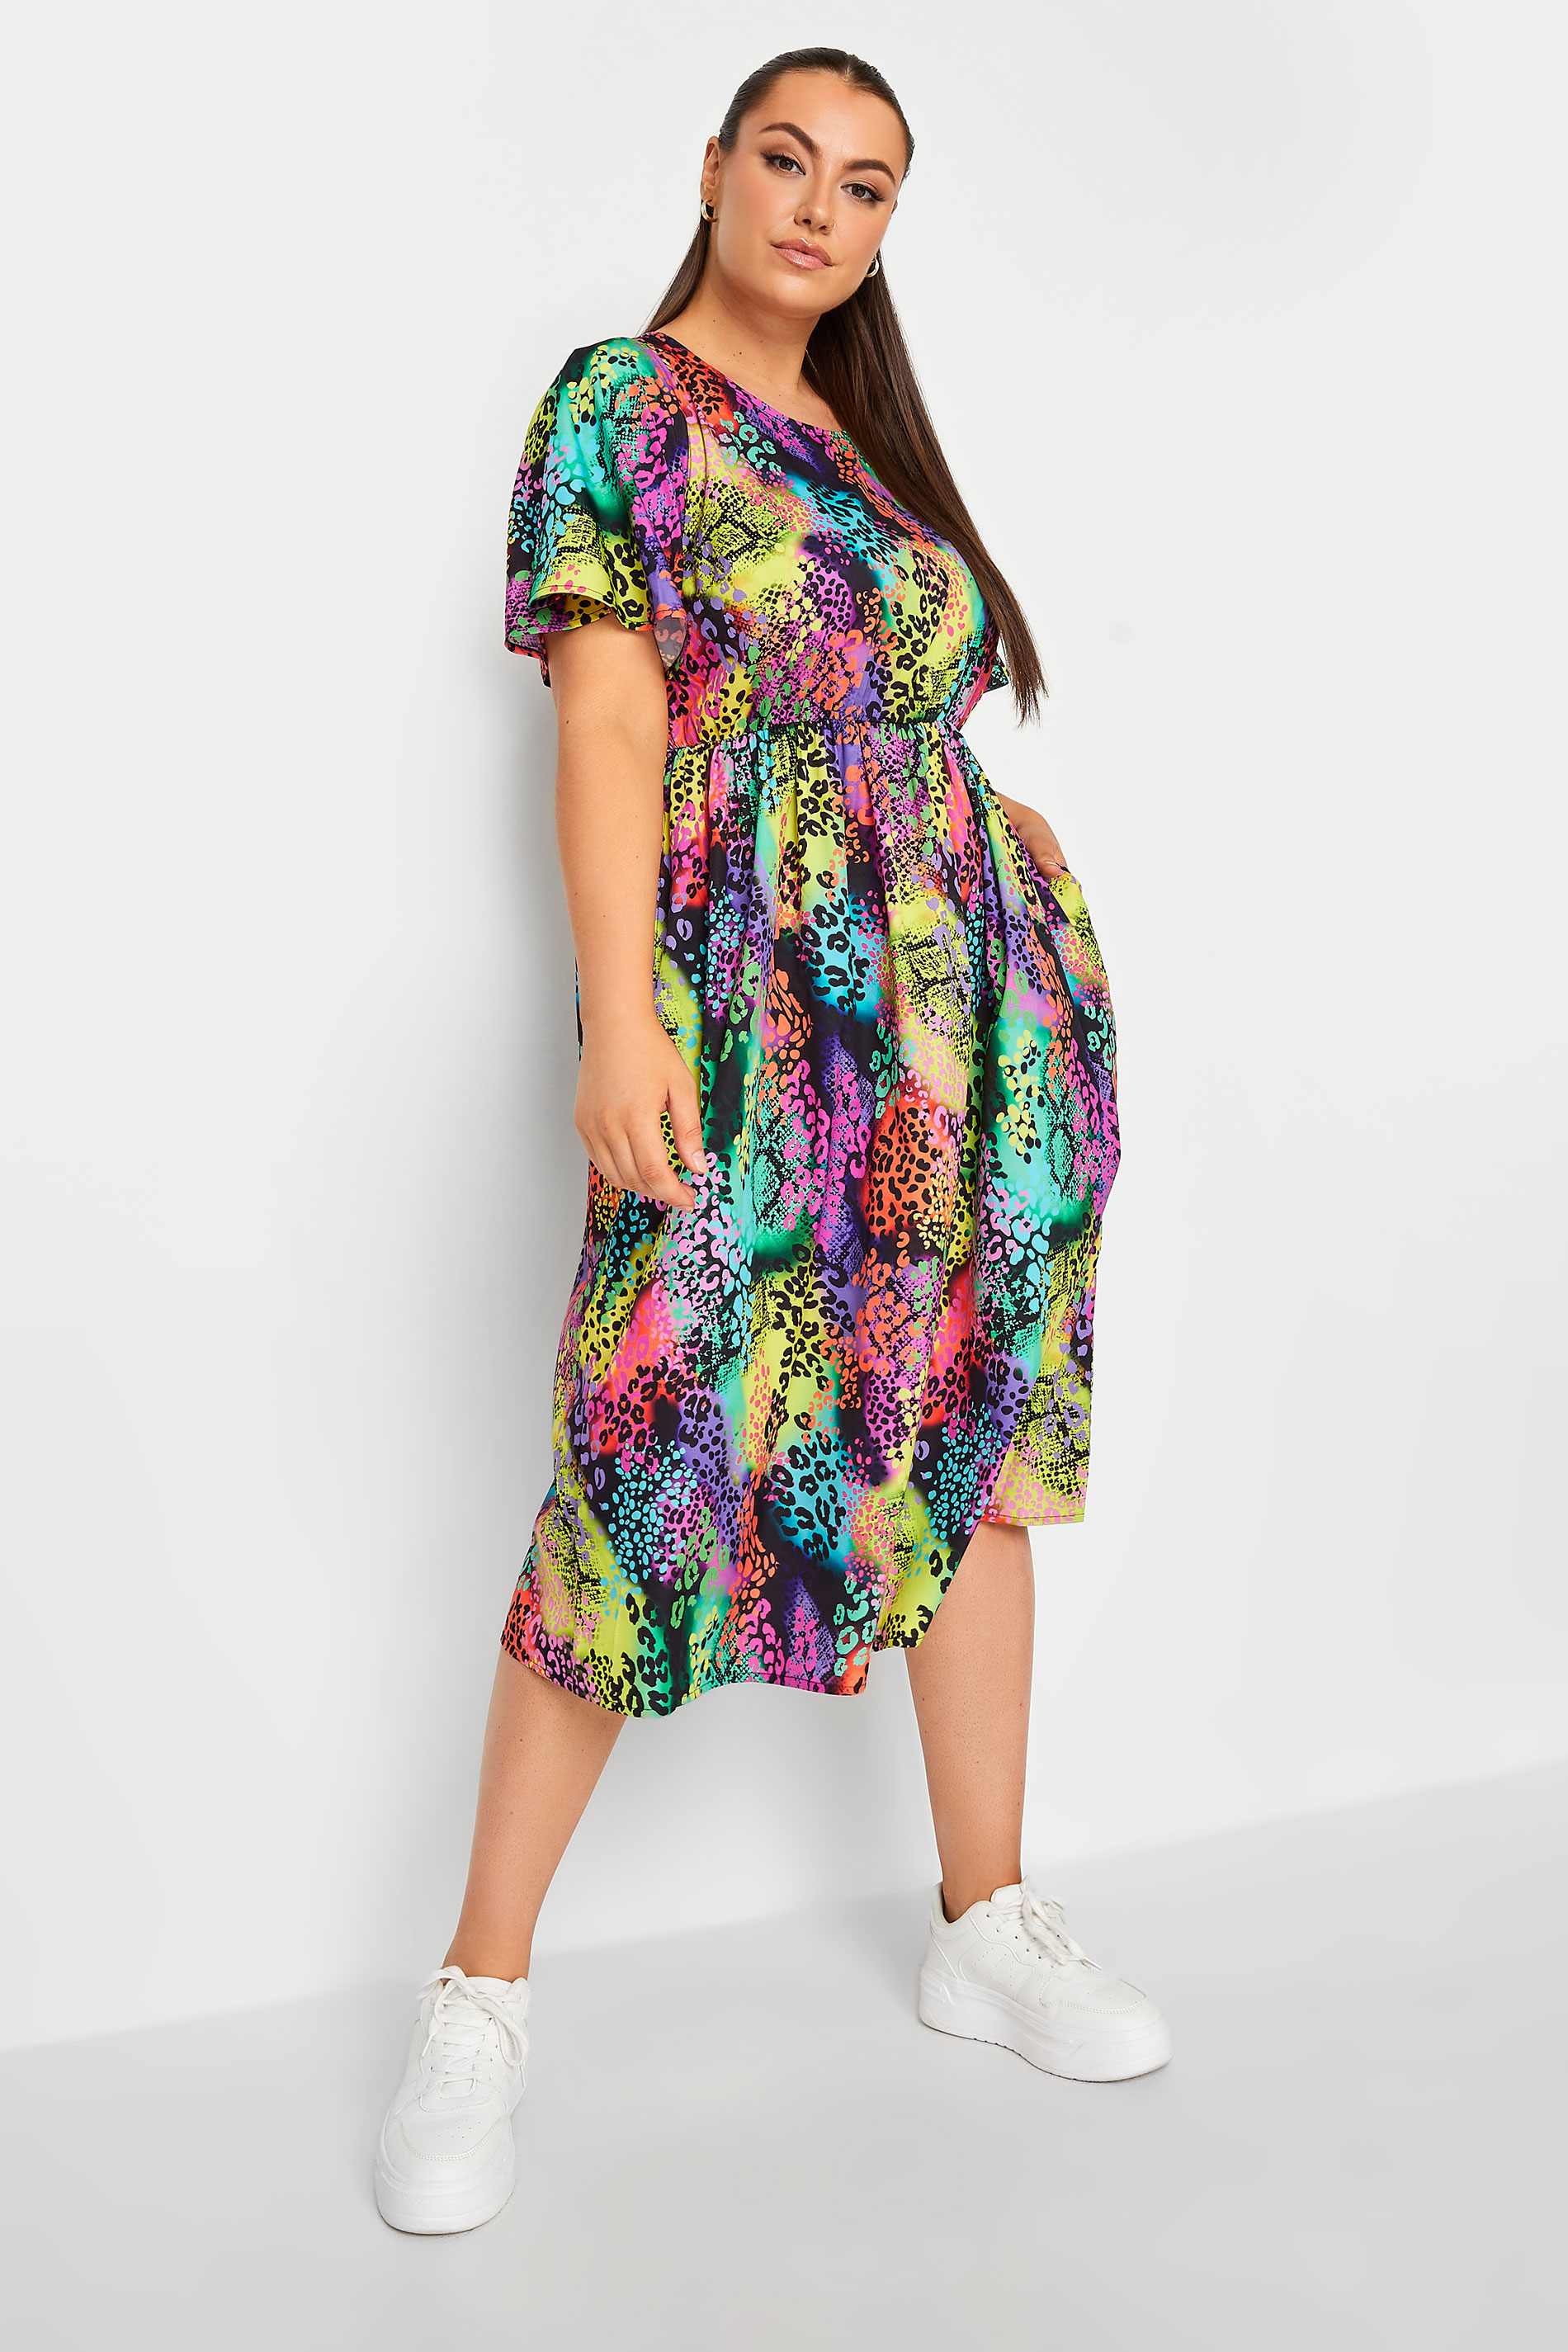 LIMITED COLLECTION Curve Plus Size Black Rainbow Leopard Print Midi Dress | Yours Clothing  2